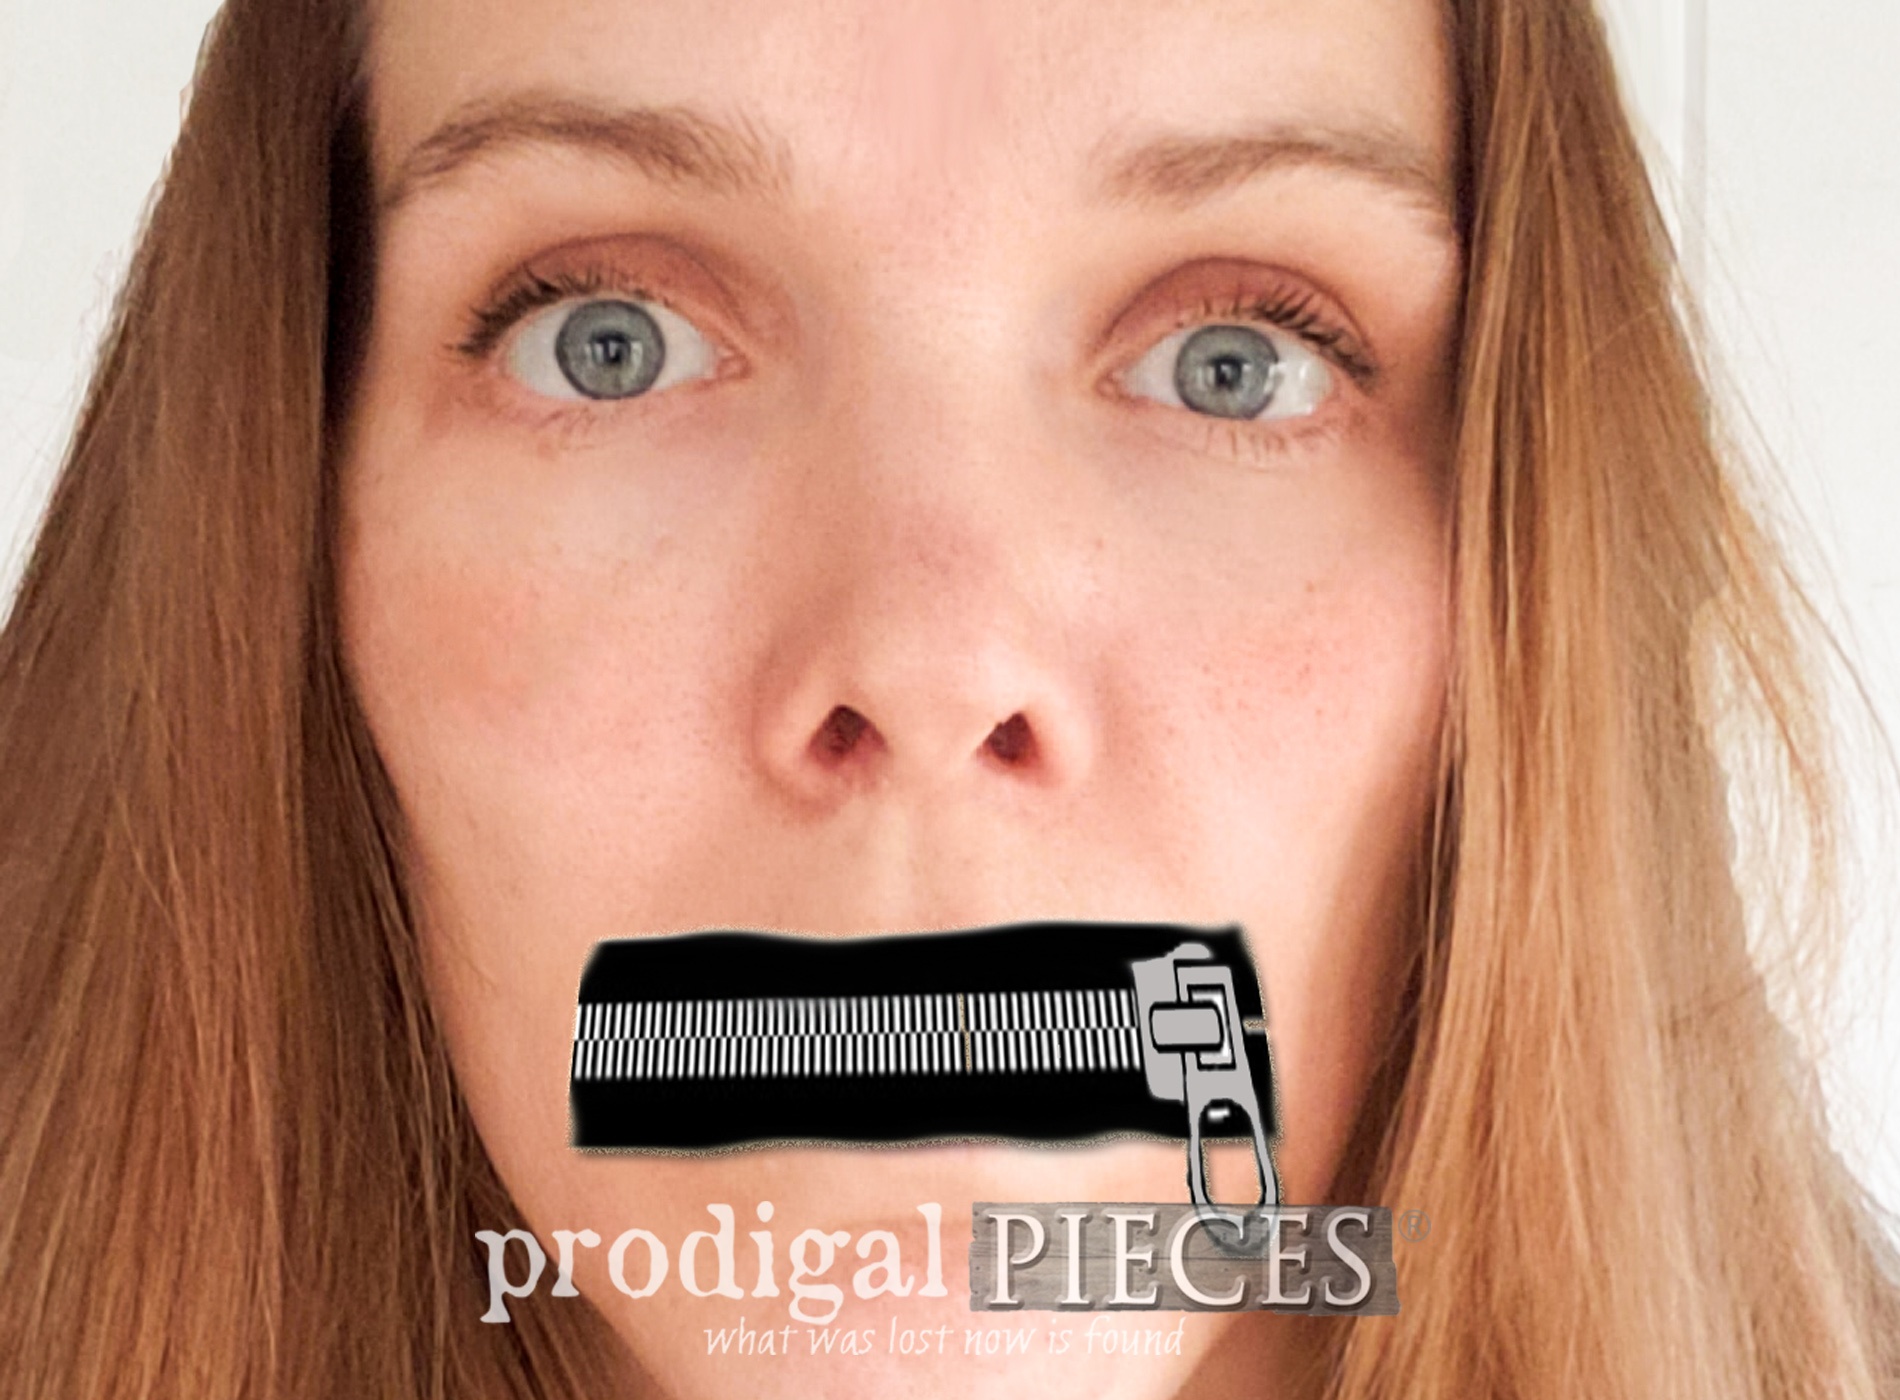 Featured Speaking the Truth No Matter What the Circumstance | You've go this! | by Larissa of Prodigal Pieces | prodigalpieces.com #prodigalpieces #faith #God #wordsofwisdom #bible #scripture